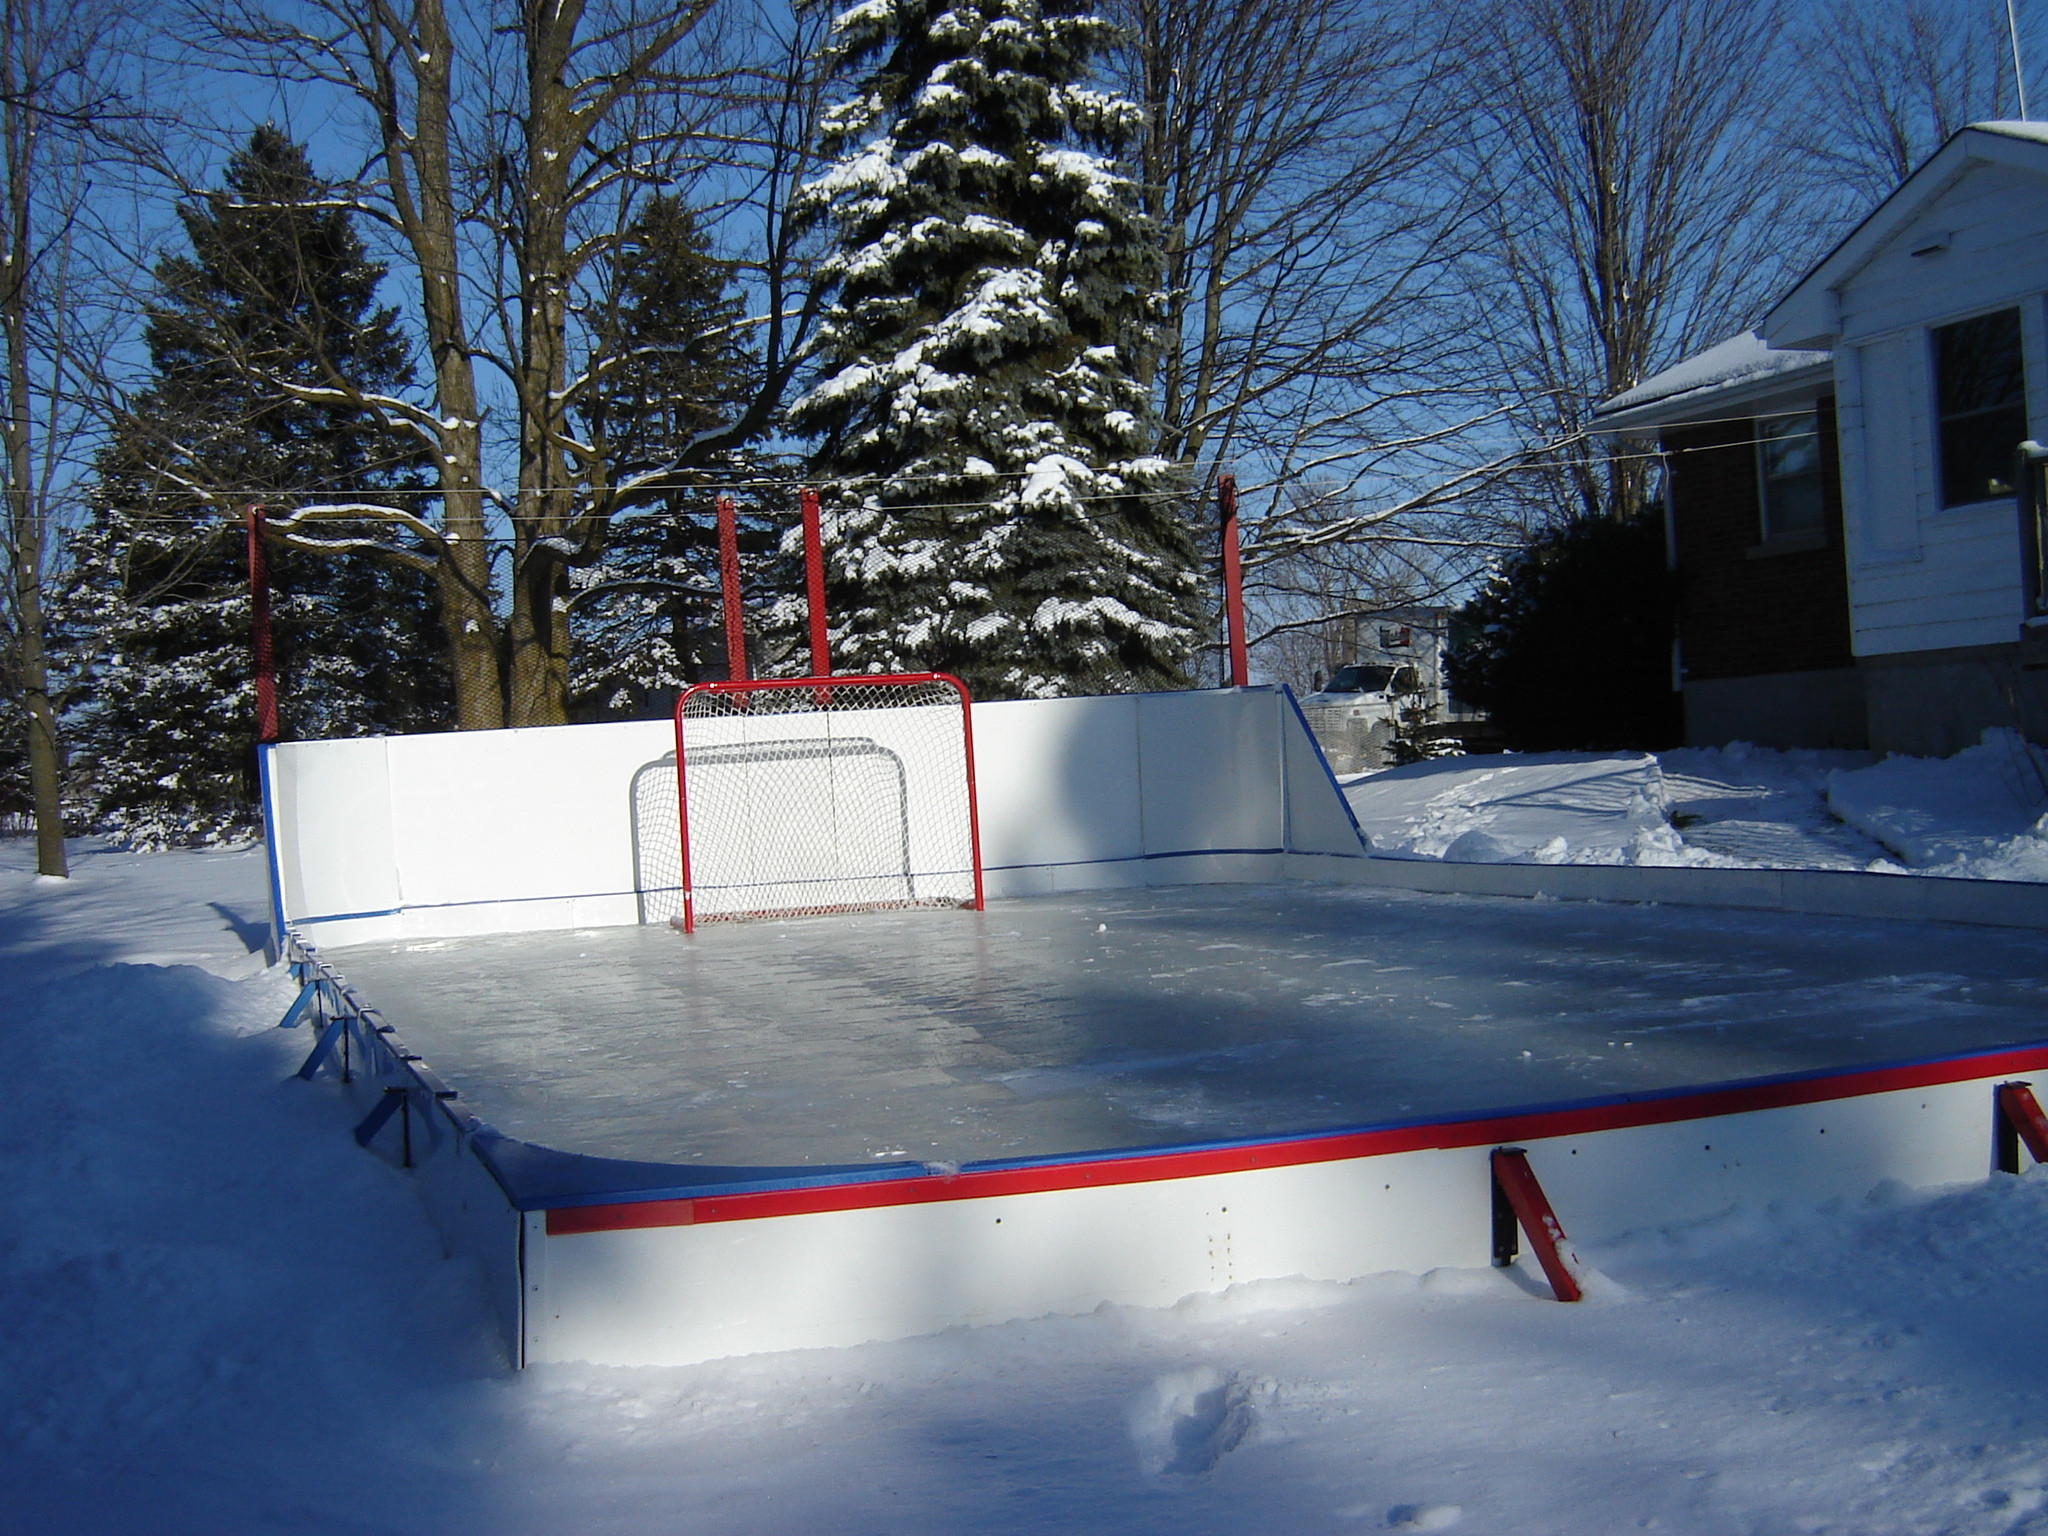 35 Insanely Chic Ice Rinks Backyard - Ice Rinks BackyarD Awesome Puck BoarD SnowboarD Ramps Boxes Rails Of Ice Rinks BackyarD